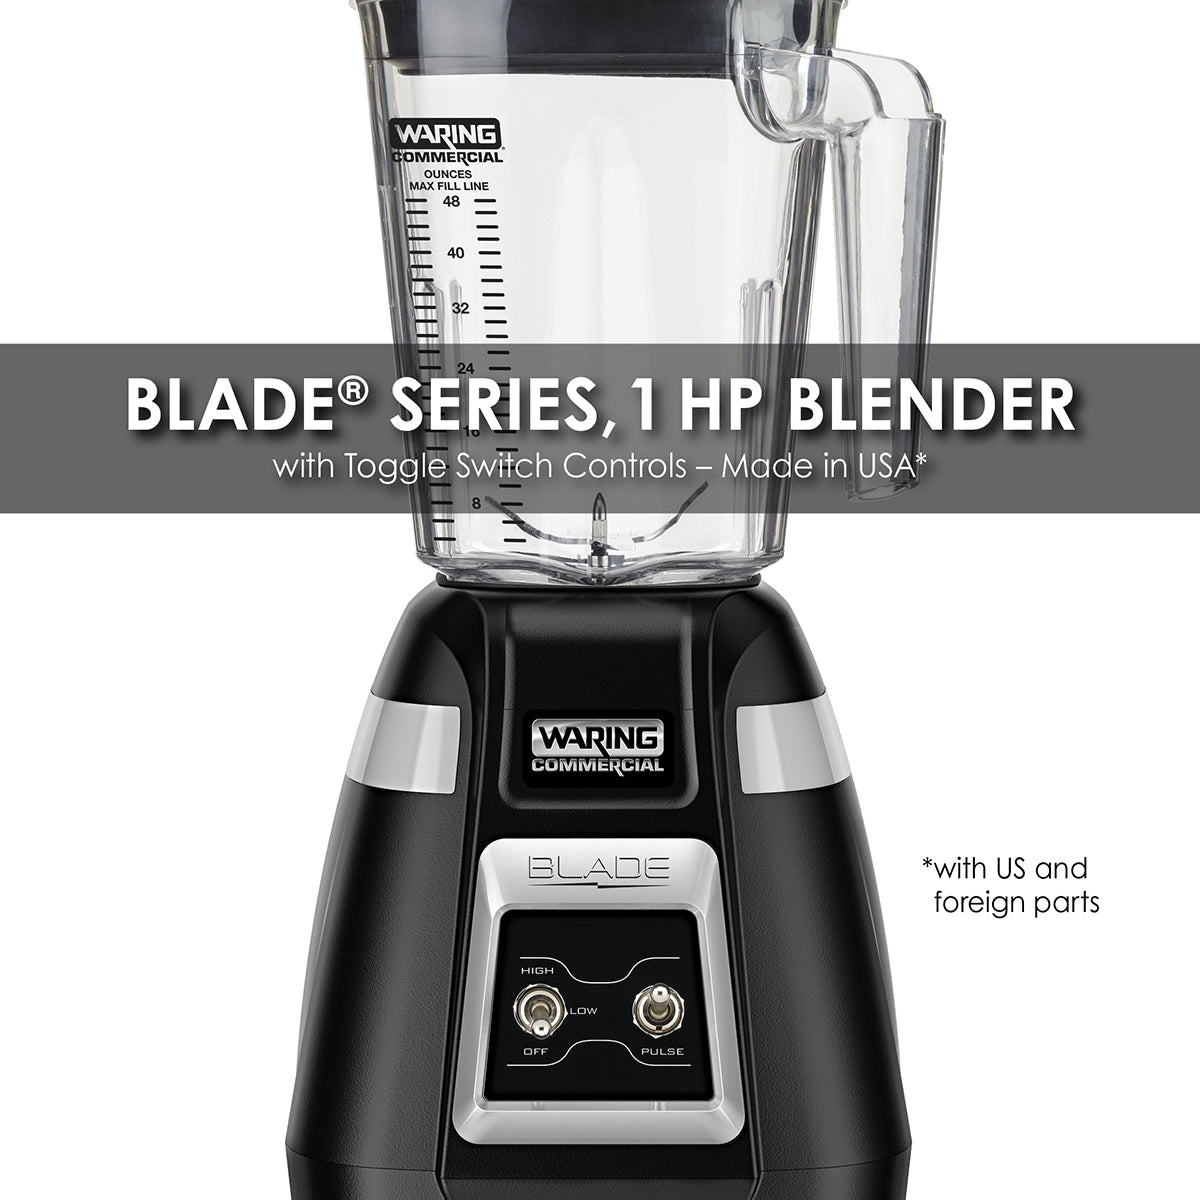 Waring BB300 1HP Bar Blender 2-Speed/PULSE w/ Toggle Switch Controls and 48 oz. Container